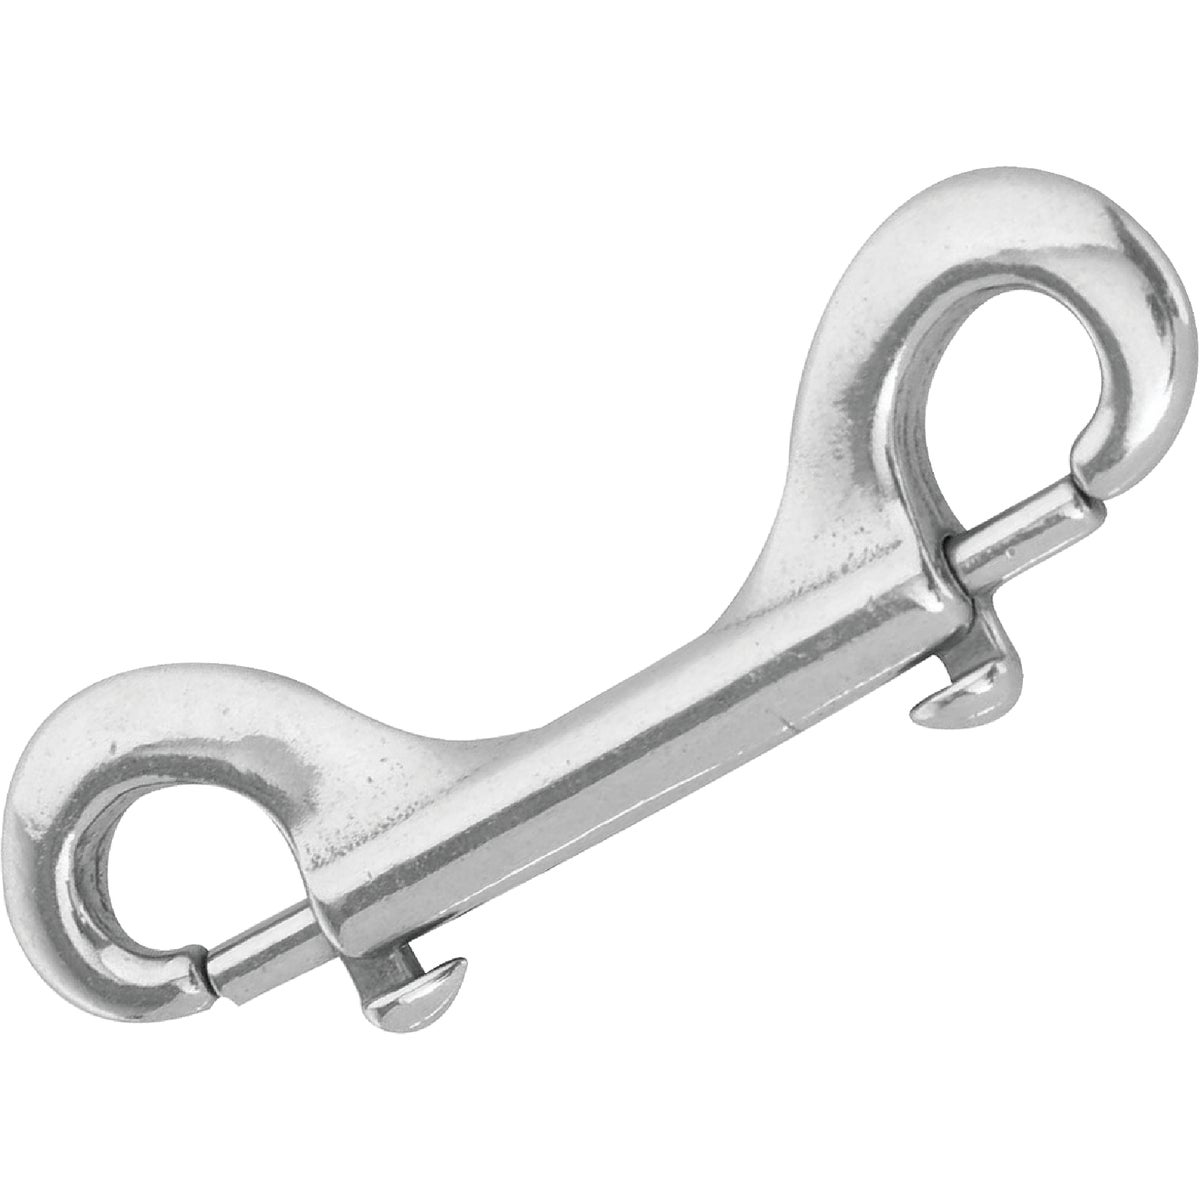 Item 769730, Polished stainless steel, double ended eye bolt snap.